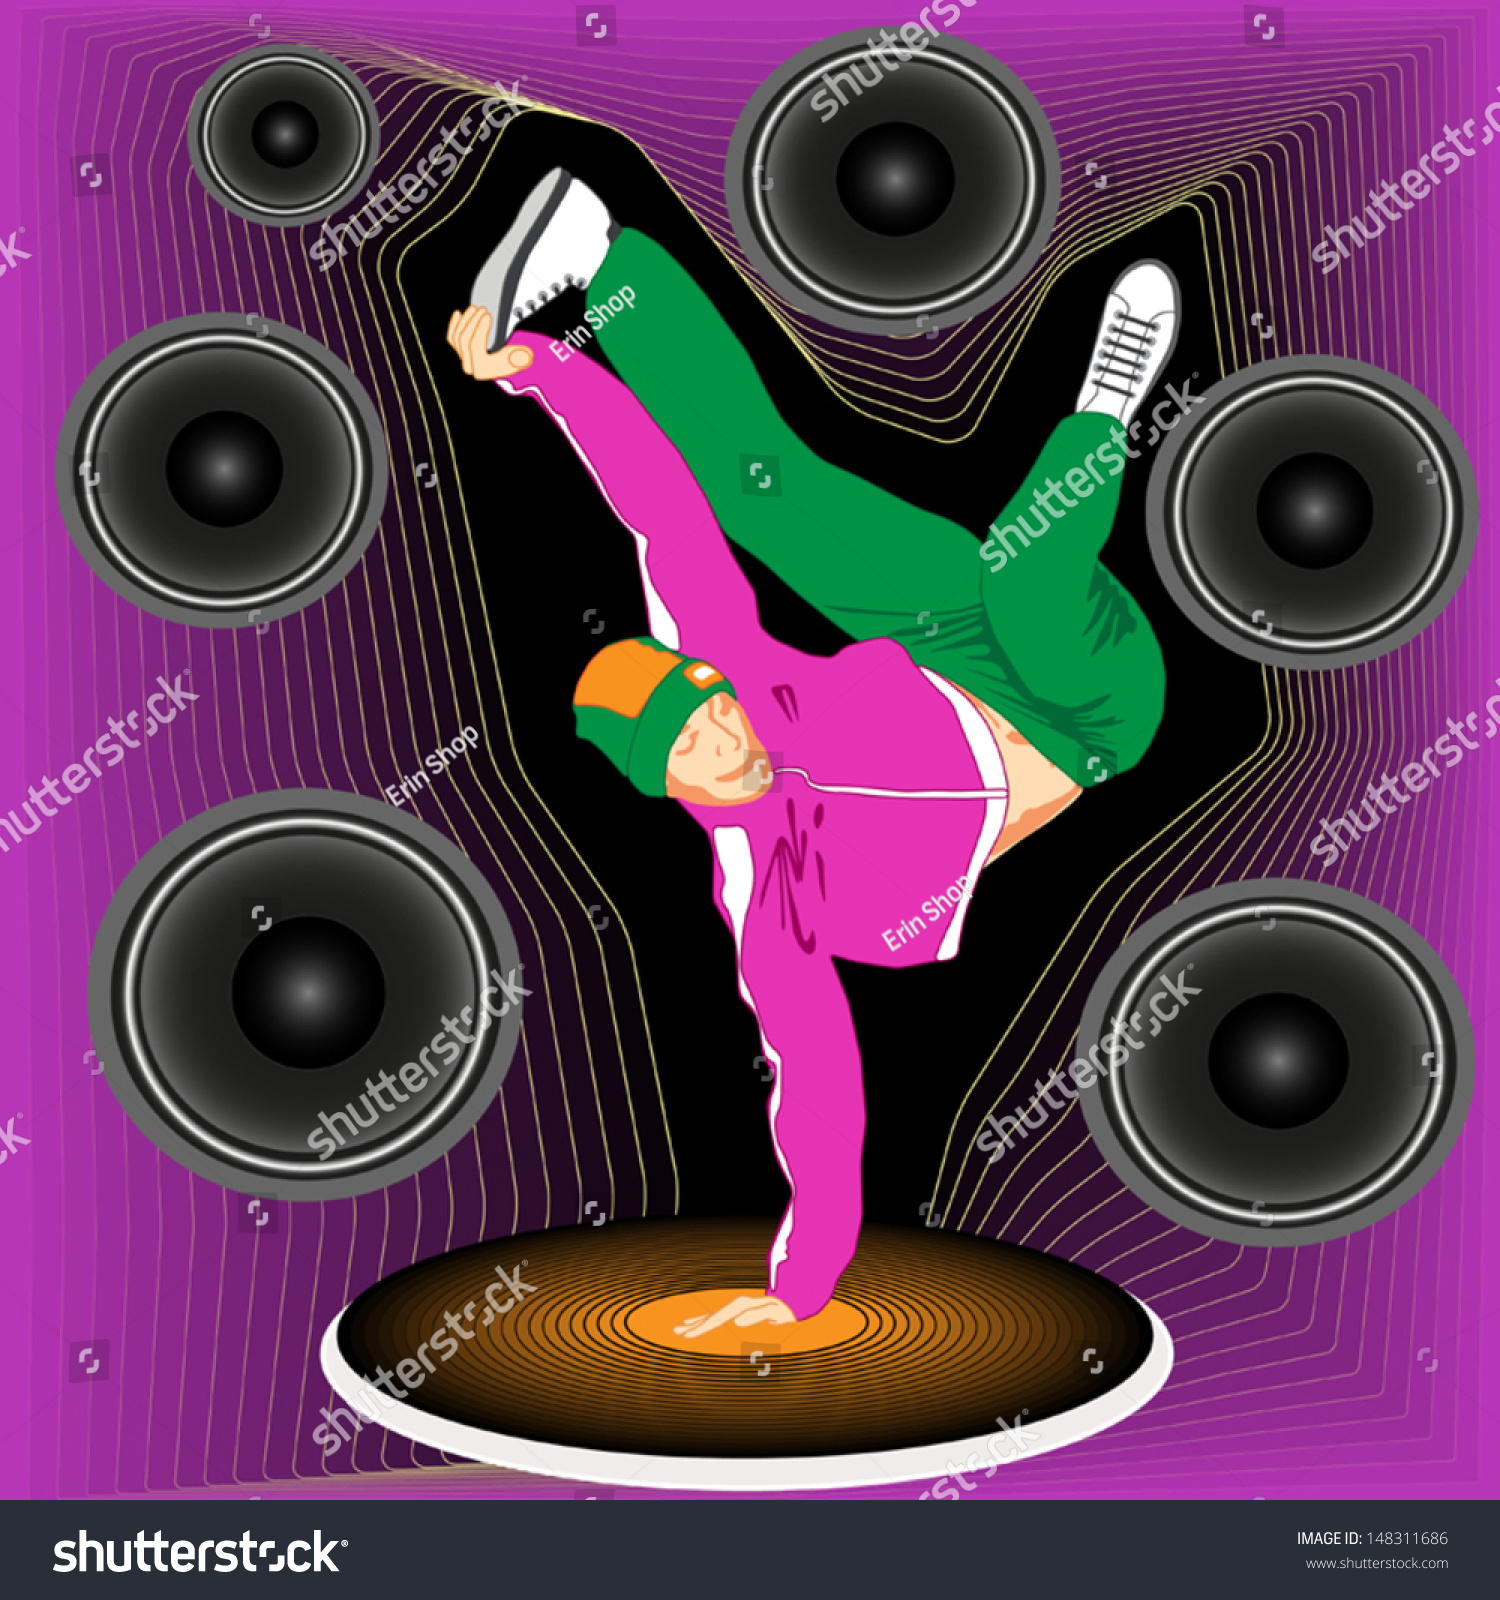 SVG of Break dancer during battle or party on abstract background with vinyl player and loudspeakers svg